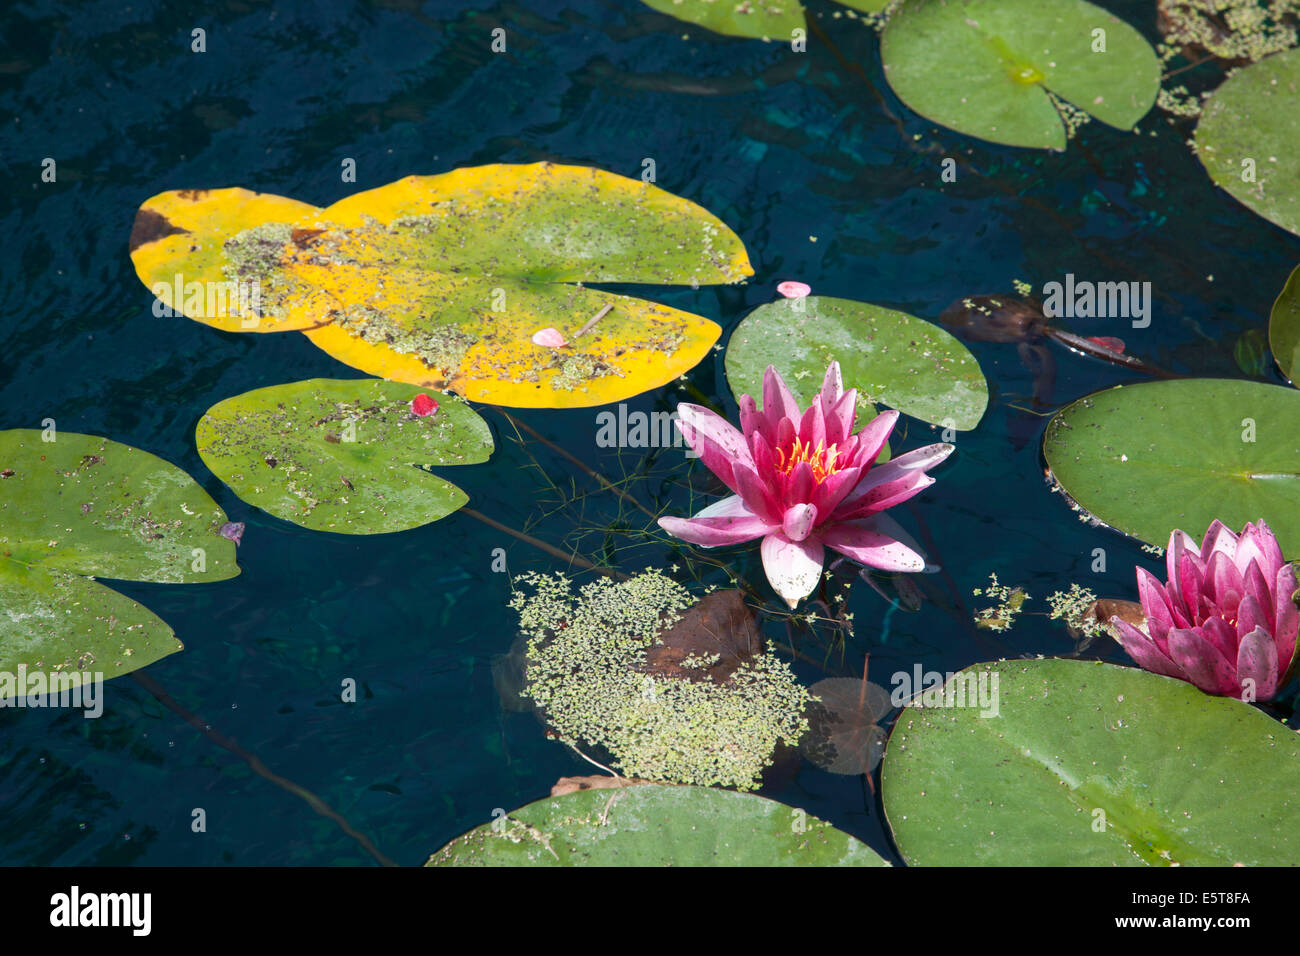 Blooming water lily floats on pond in East London Stock Photo